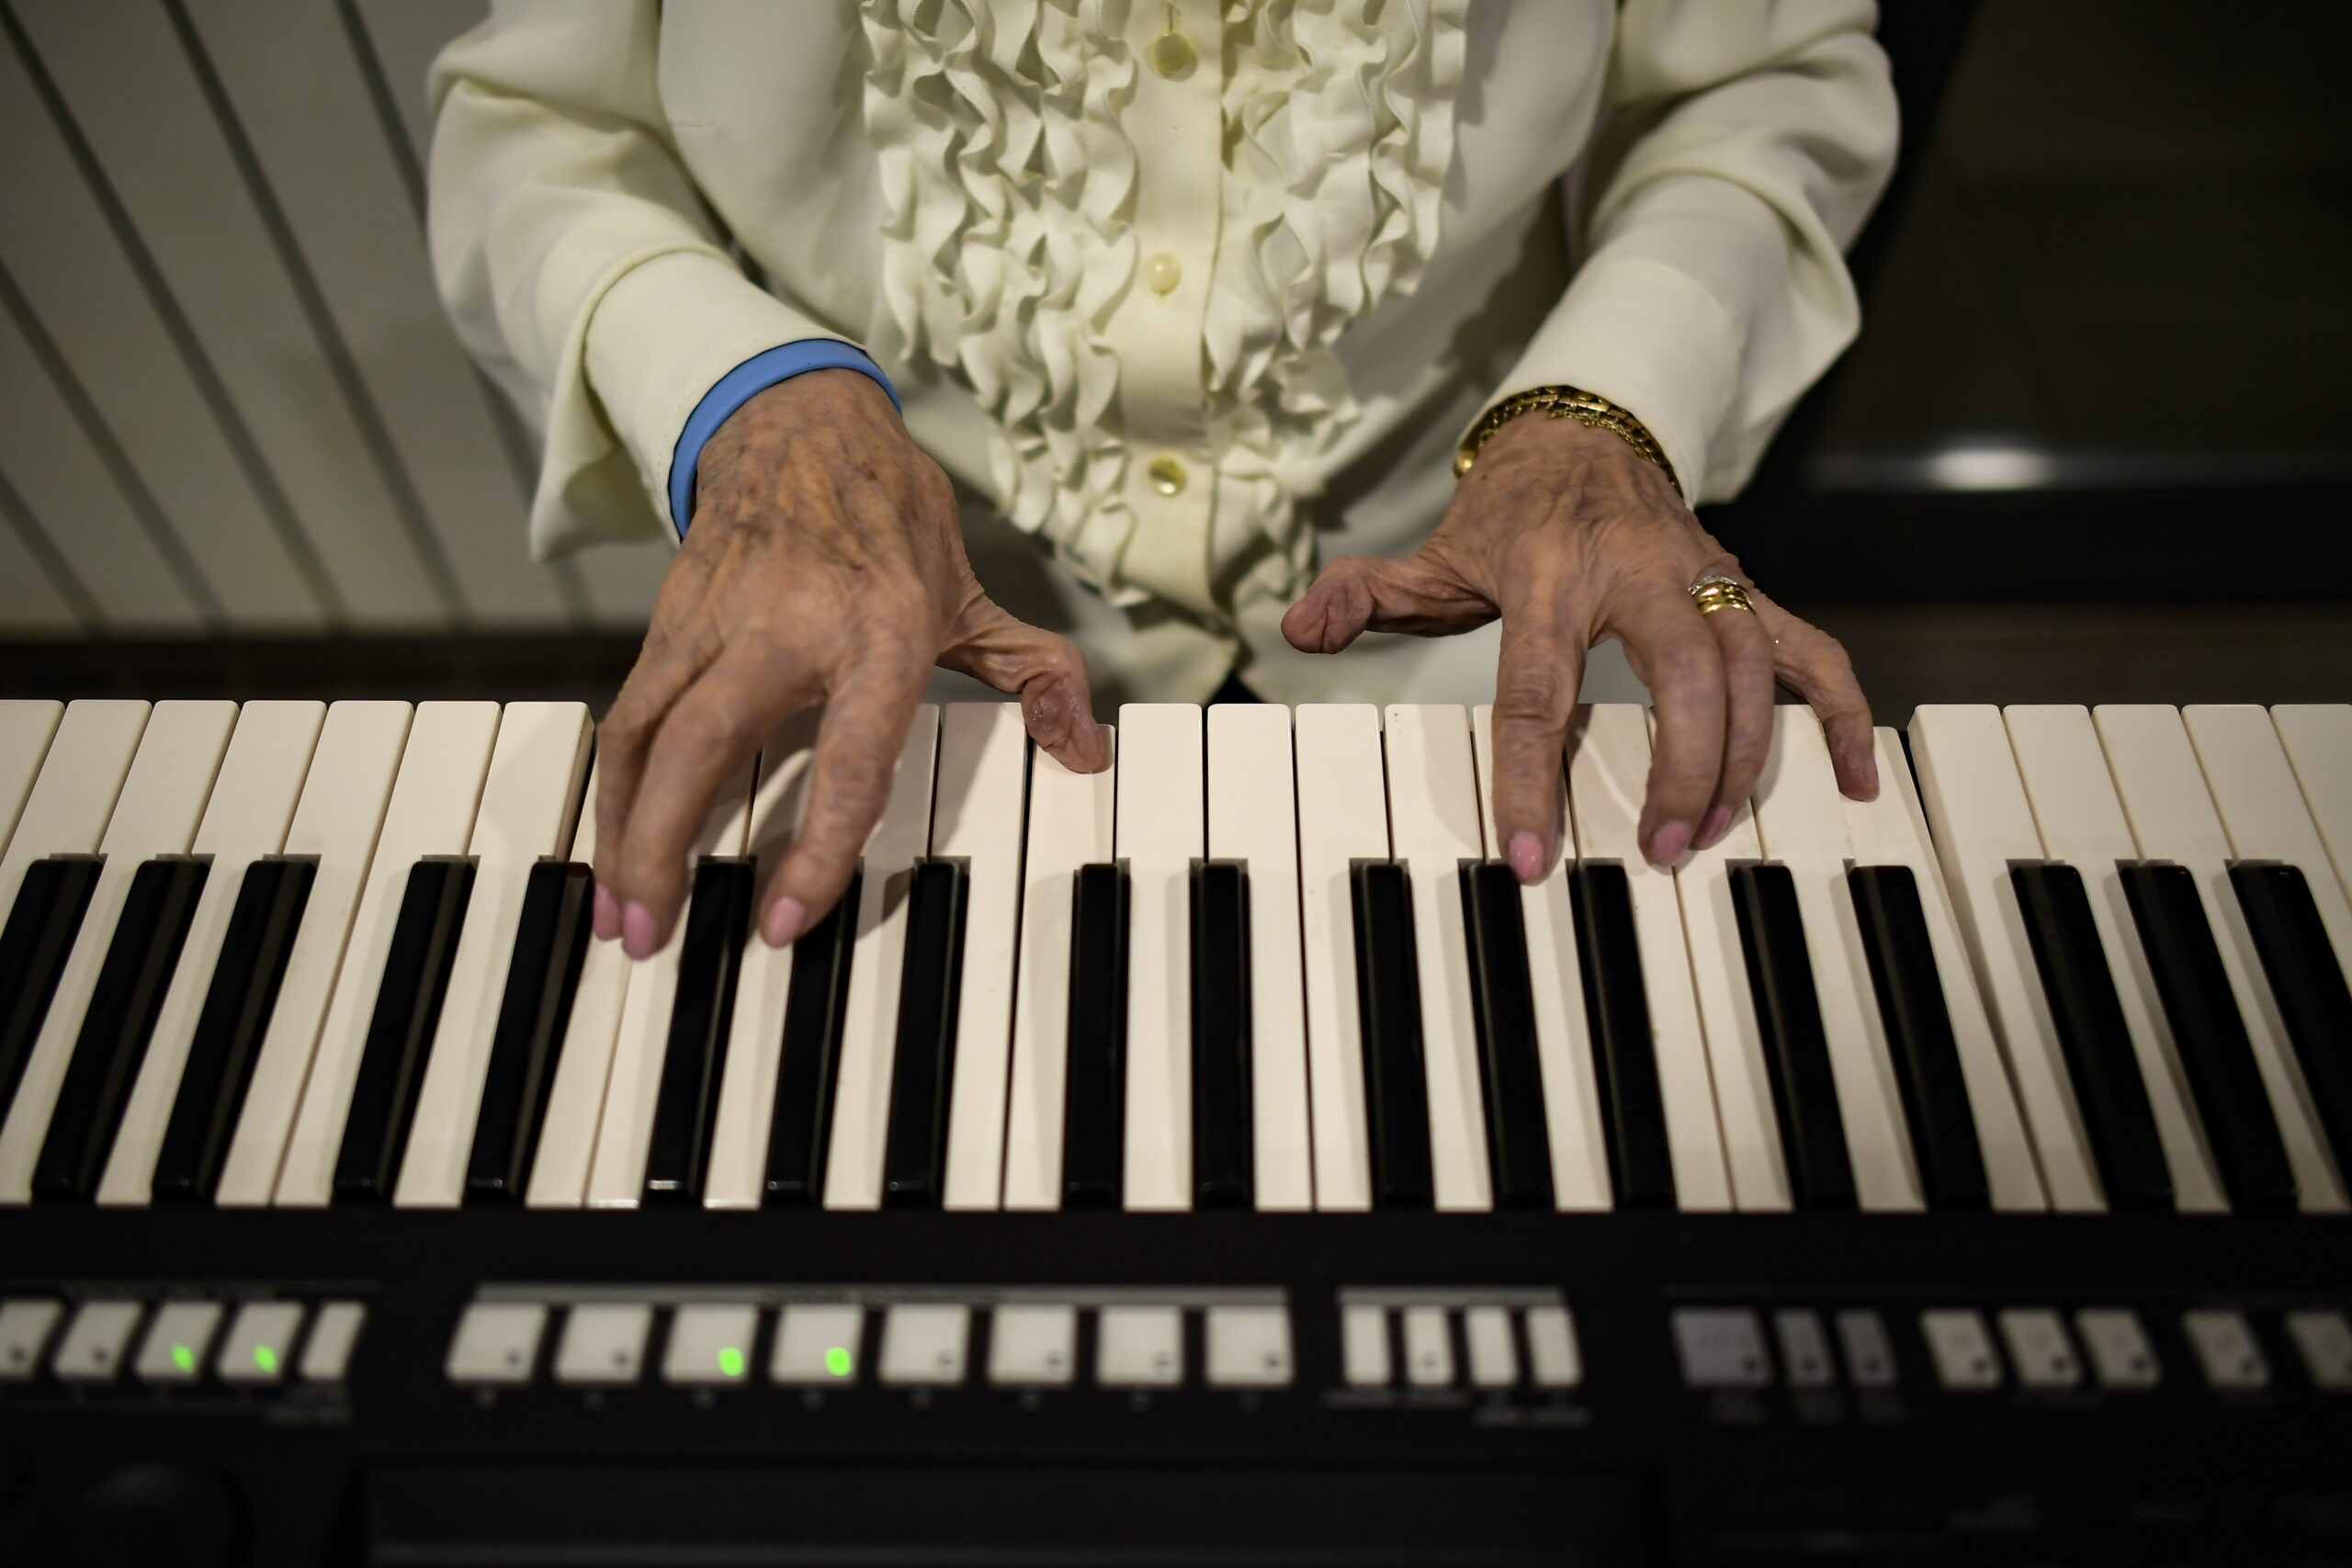 Conchita, 90 years old, a resident of the San Jeronimo nursing home, plays a piano during New Year's Eve celebrations